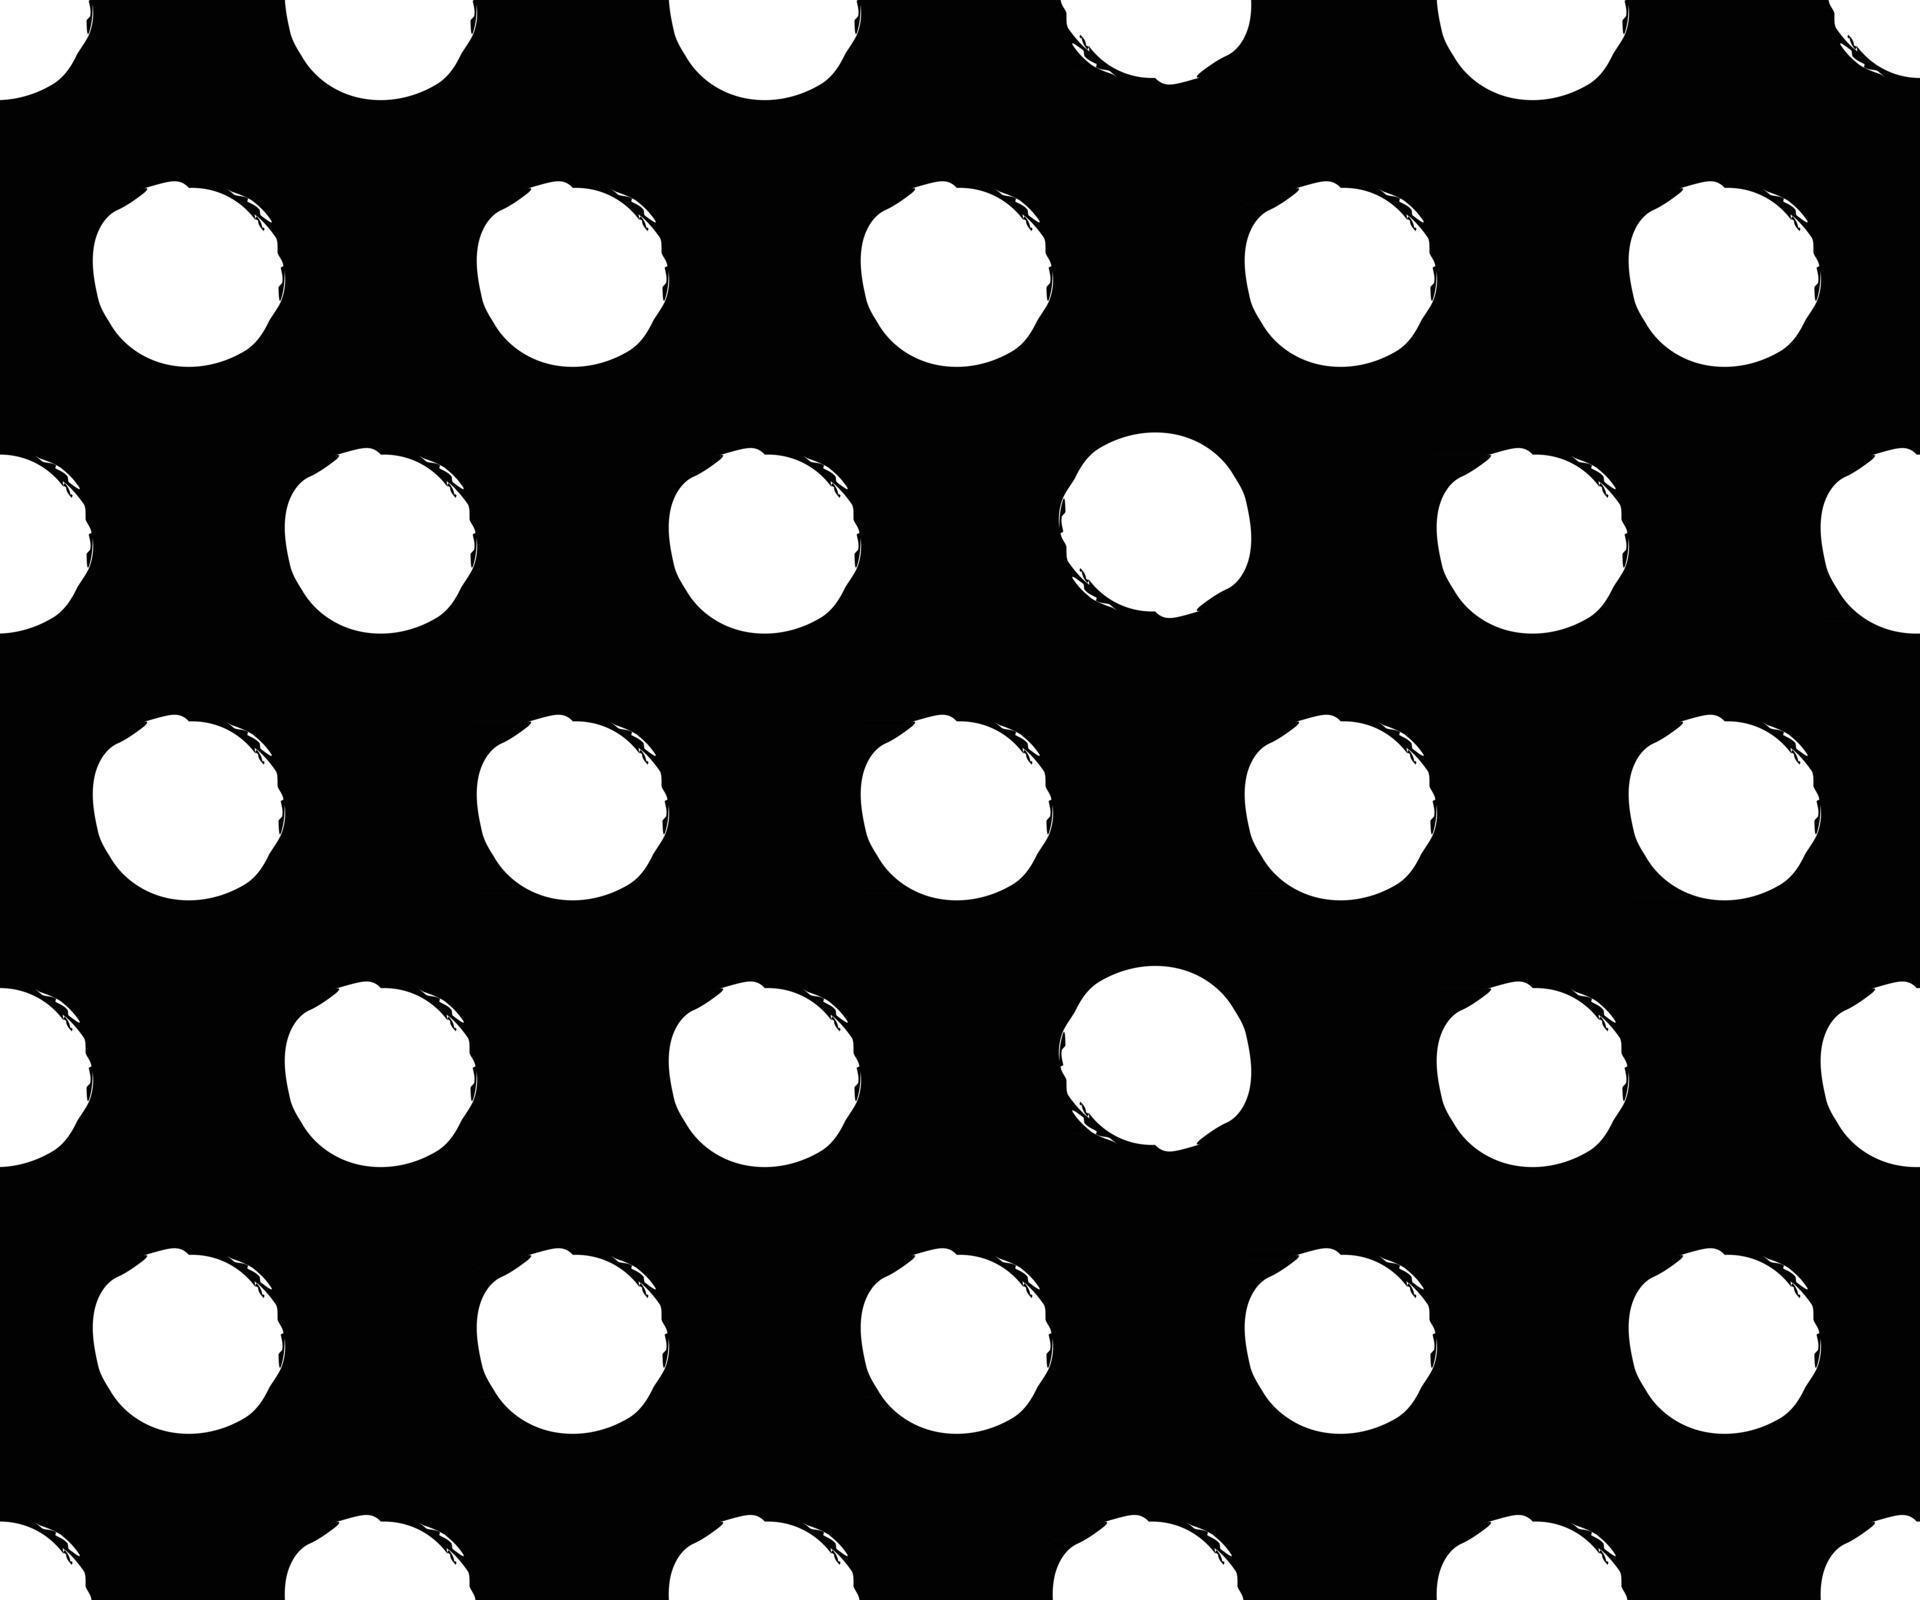 black and white polka dot pattern abstract background vector 2890253